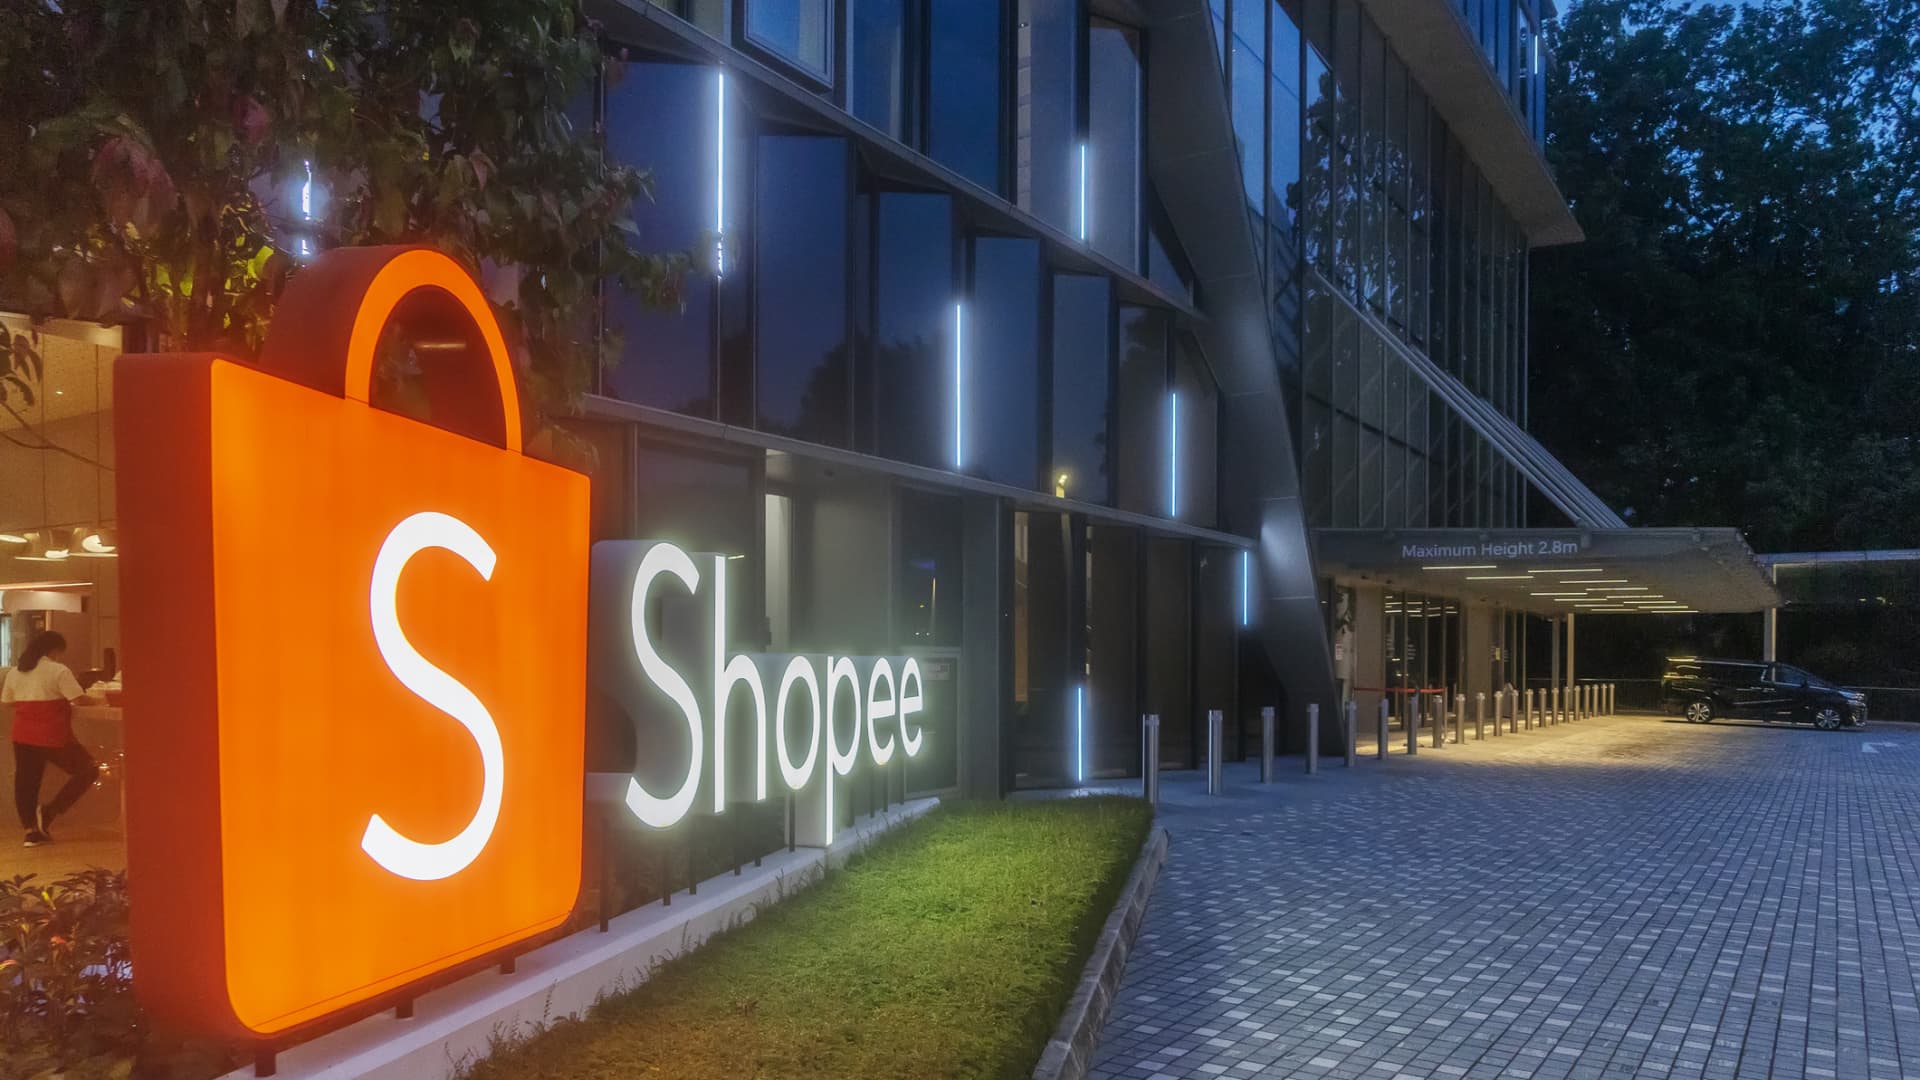 Shares of Shopee-owner Sea surge 14% after stronger-than-expected revenue - CNBC